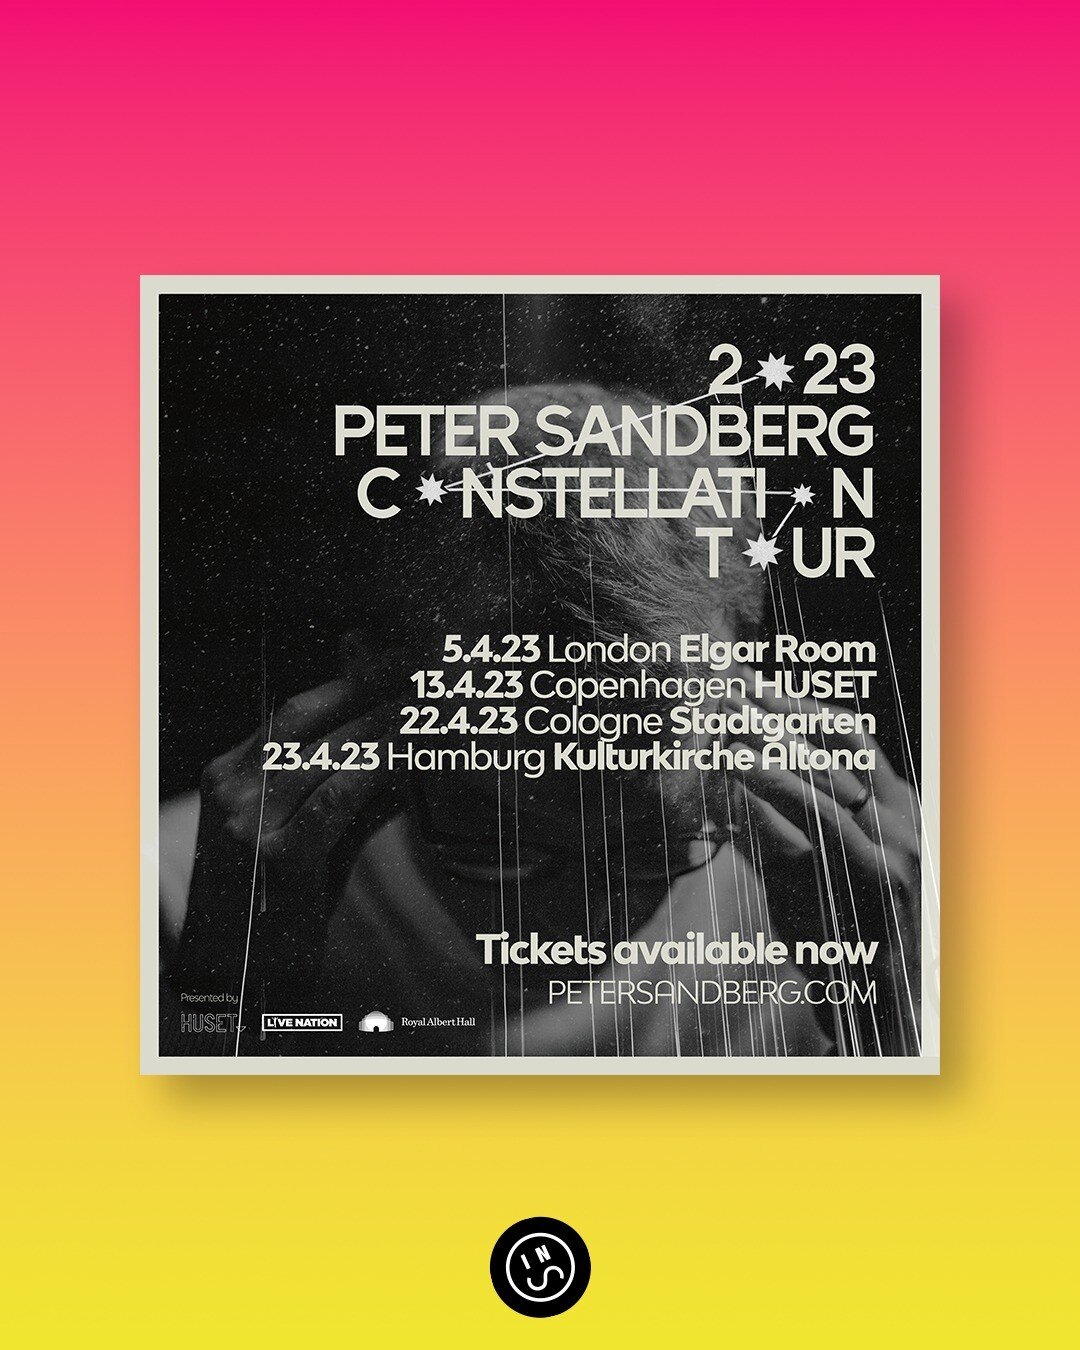 @petersandberg_ drops new Constellation 'Orion' and upgrades Hamburg venue on upcoming EU tour. ✸ 

Thanks to @deezer &amp; @applemusic for sweet playlist support ✸ Check out Orion movements I, II &amp; III via link in Peter's bio!
&bull;
&bull;
&bul